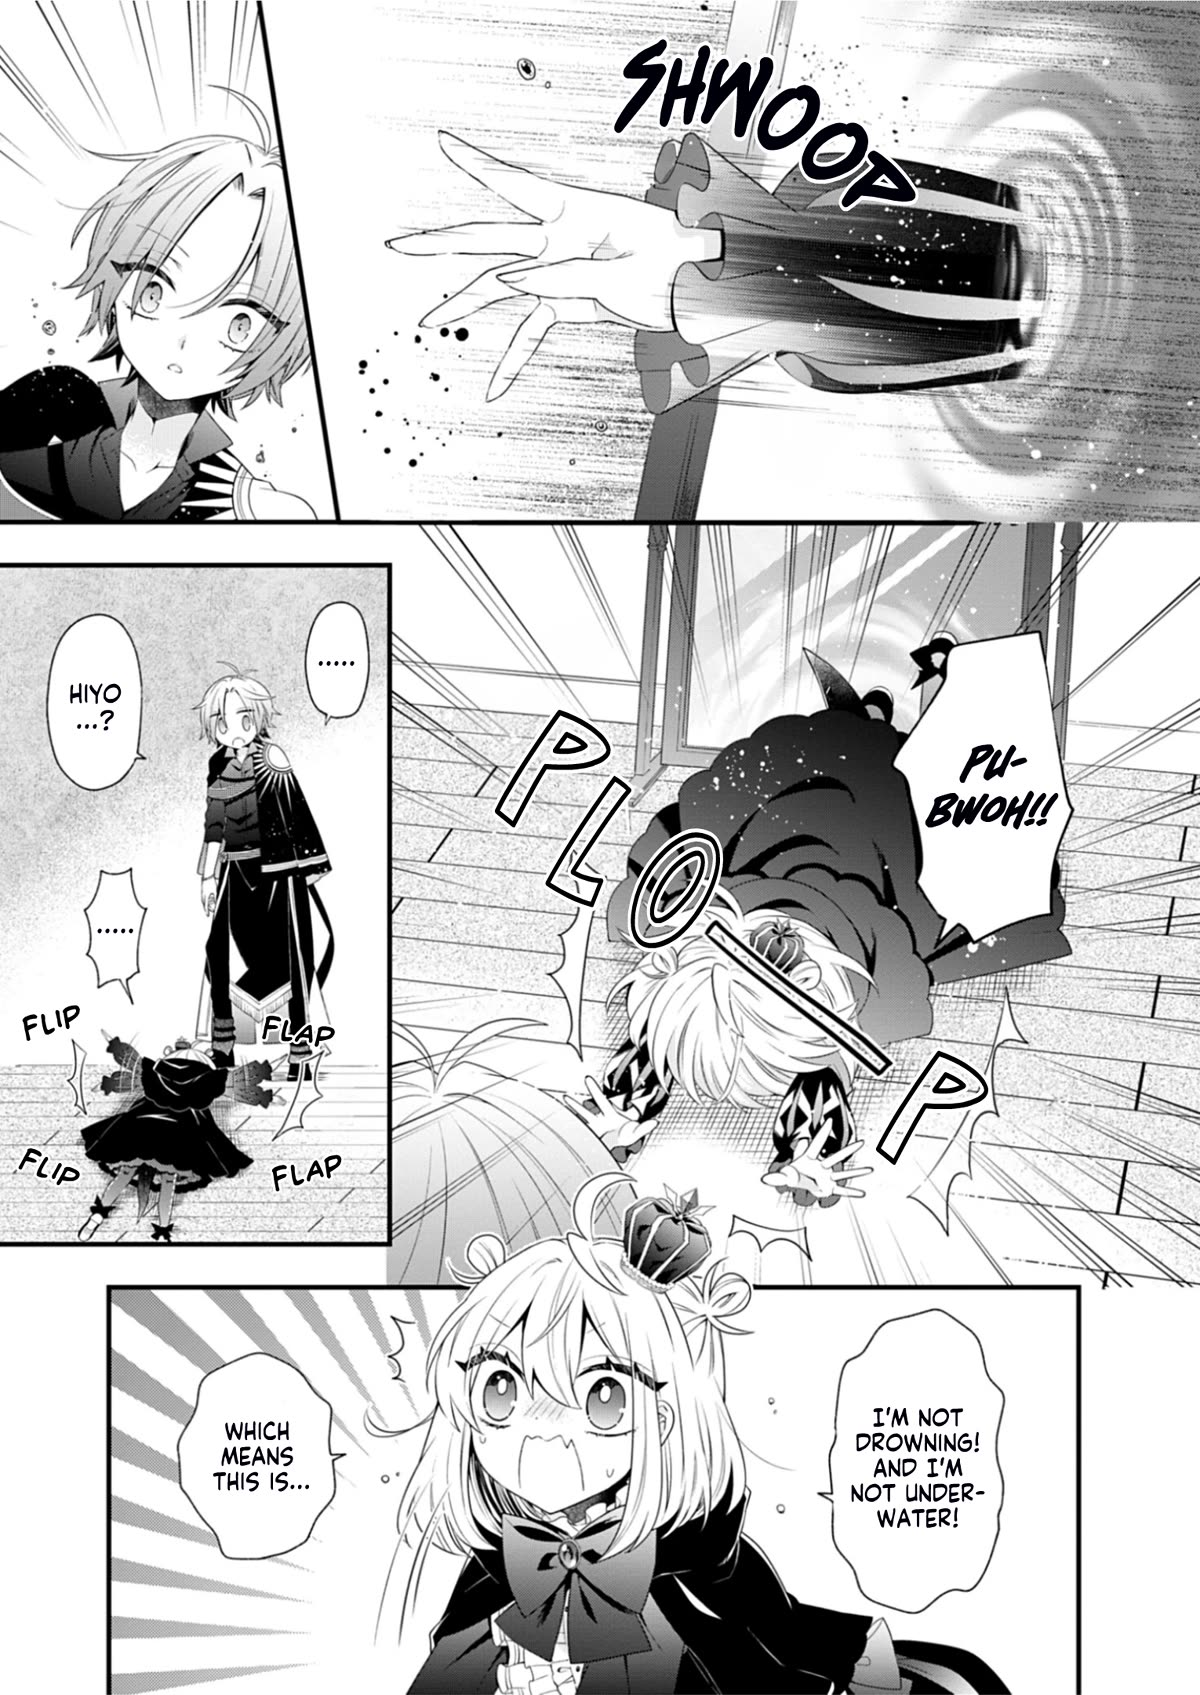 The Old Man That Was Reincarnated as a Young Girl in the Demon World Wants to Become the Demon Lord for the Sake of Peace - chapter 4 - #4